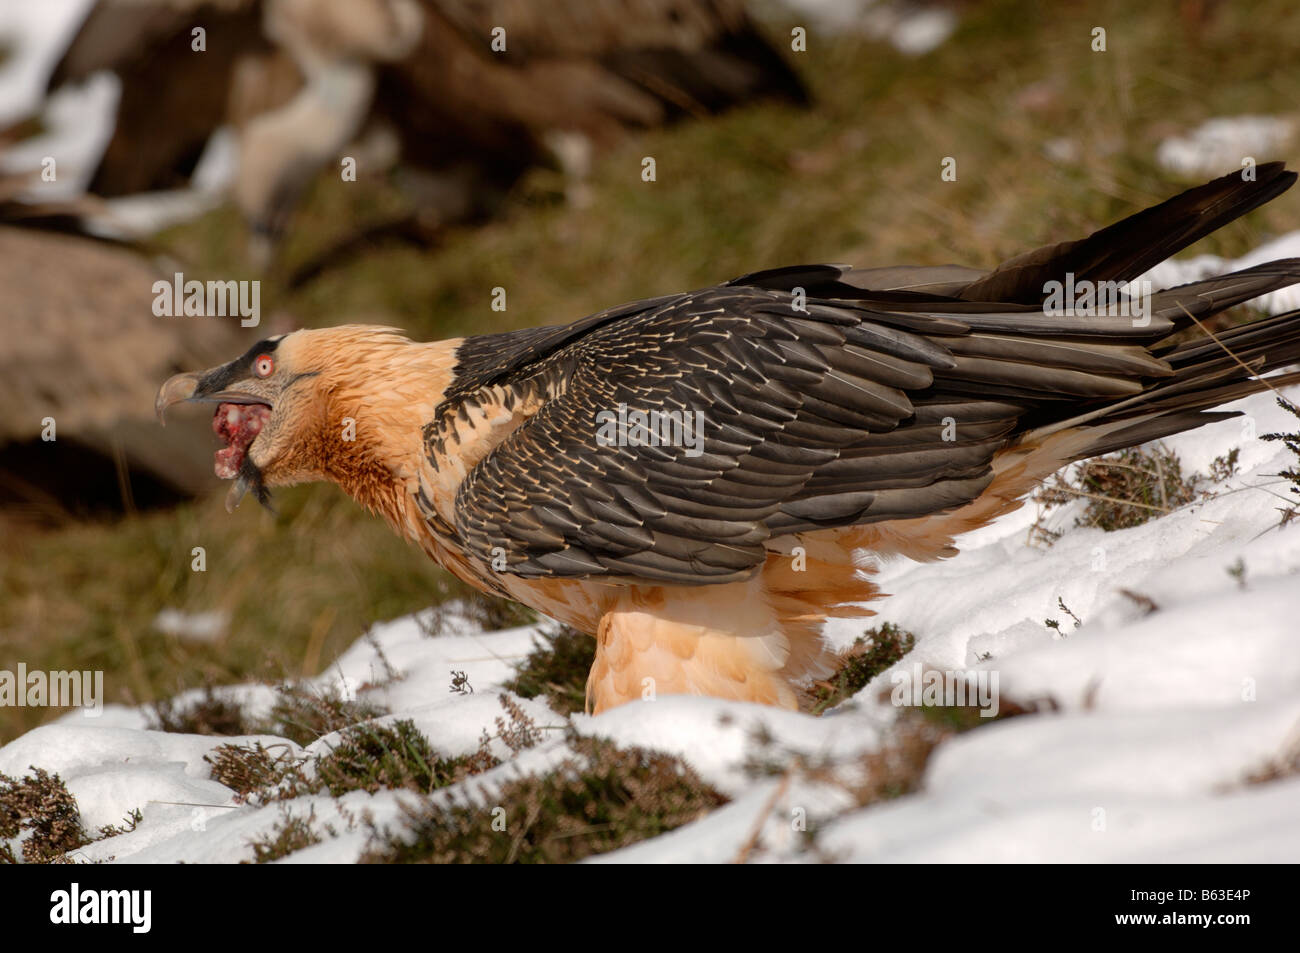 Bearded Vulture or Lammergeier Gypaetus barbatus, Adult swallowing bone in snow Photographed in French Pyrenees Stock Photo